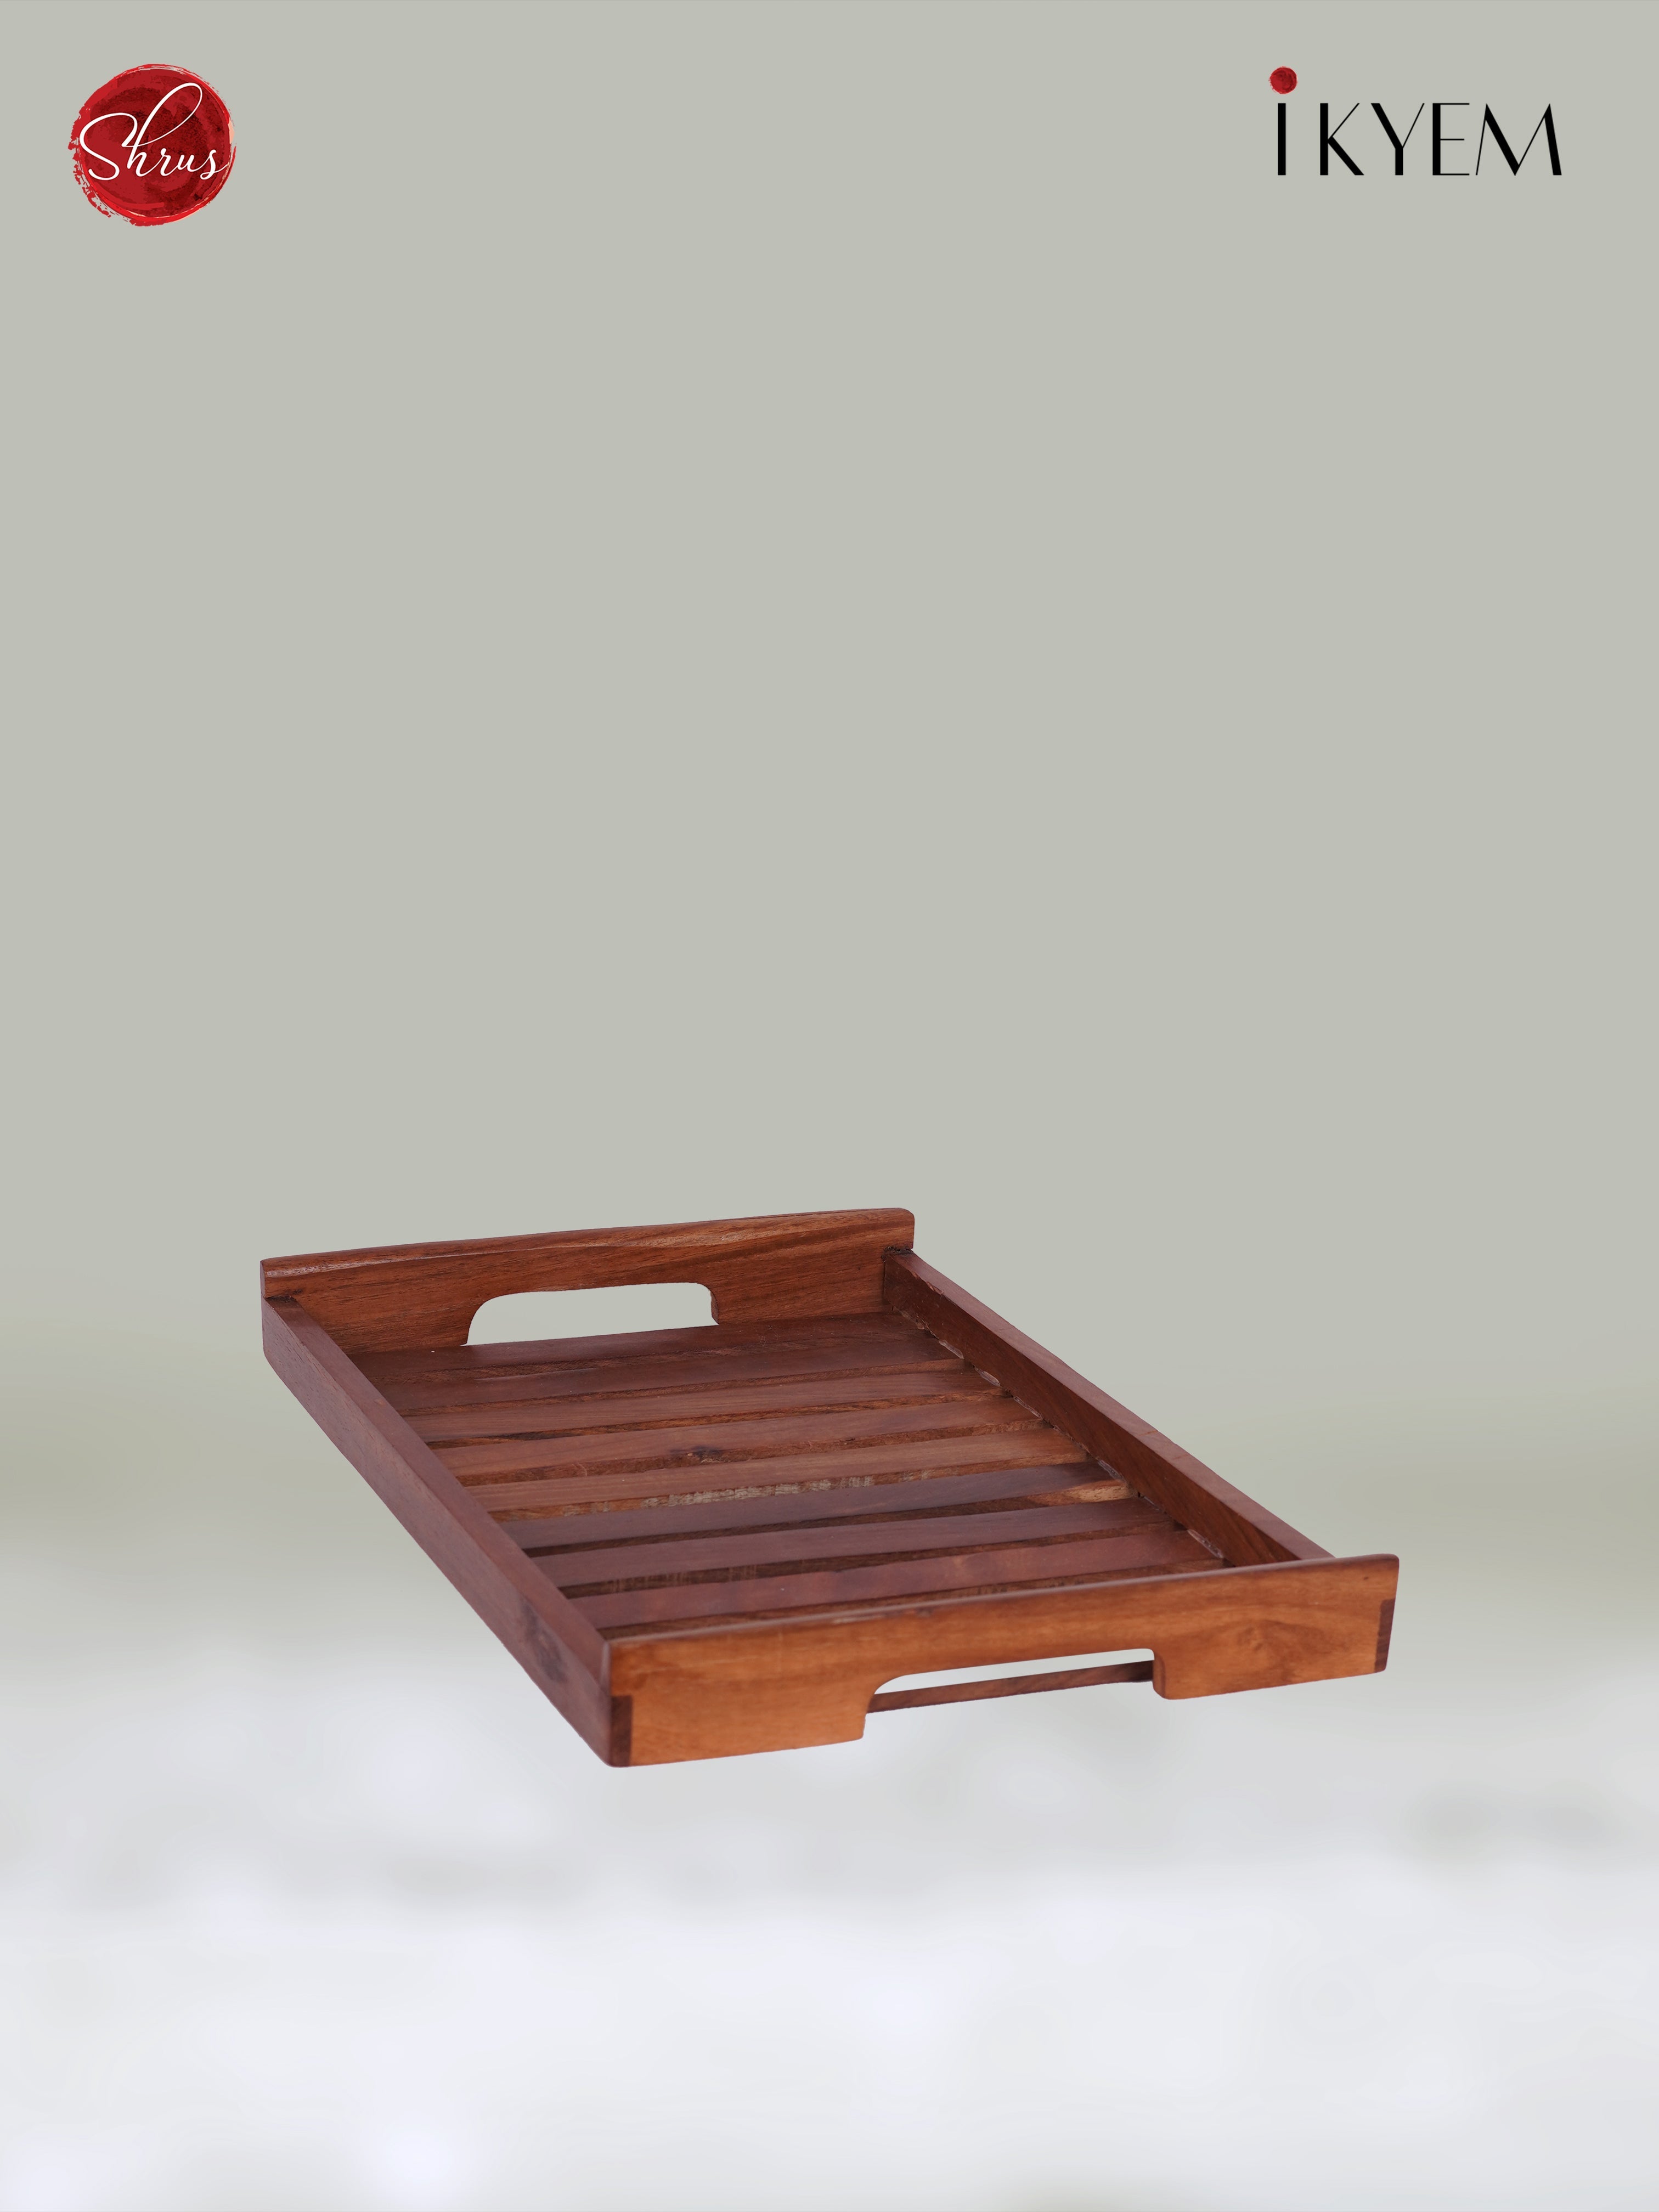 Hand Crafted Wooden Tray - Return Gift